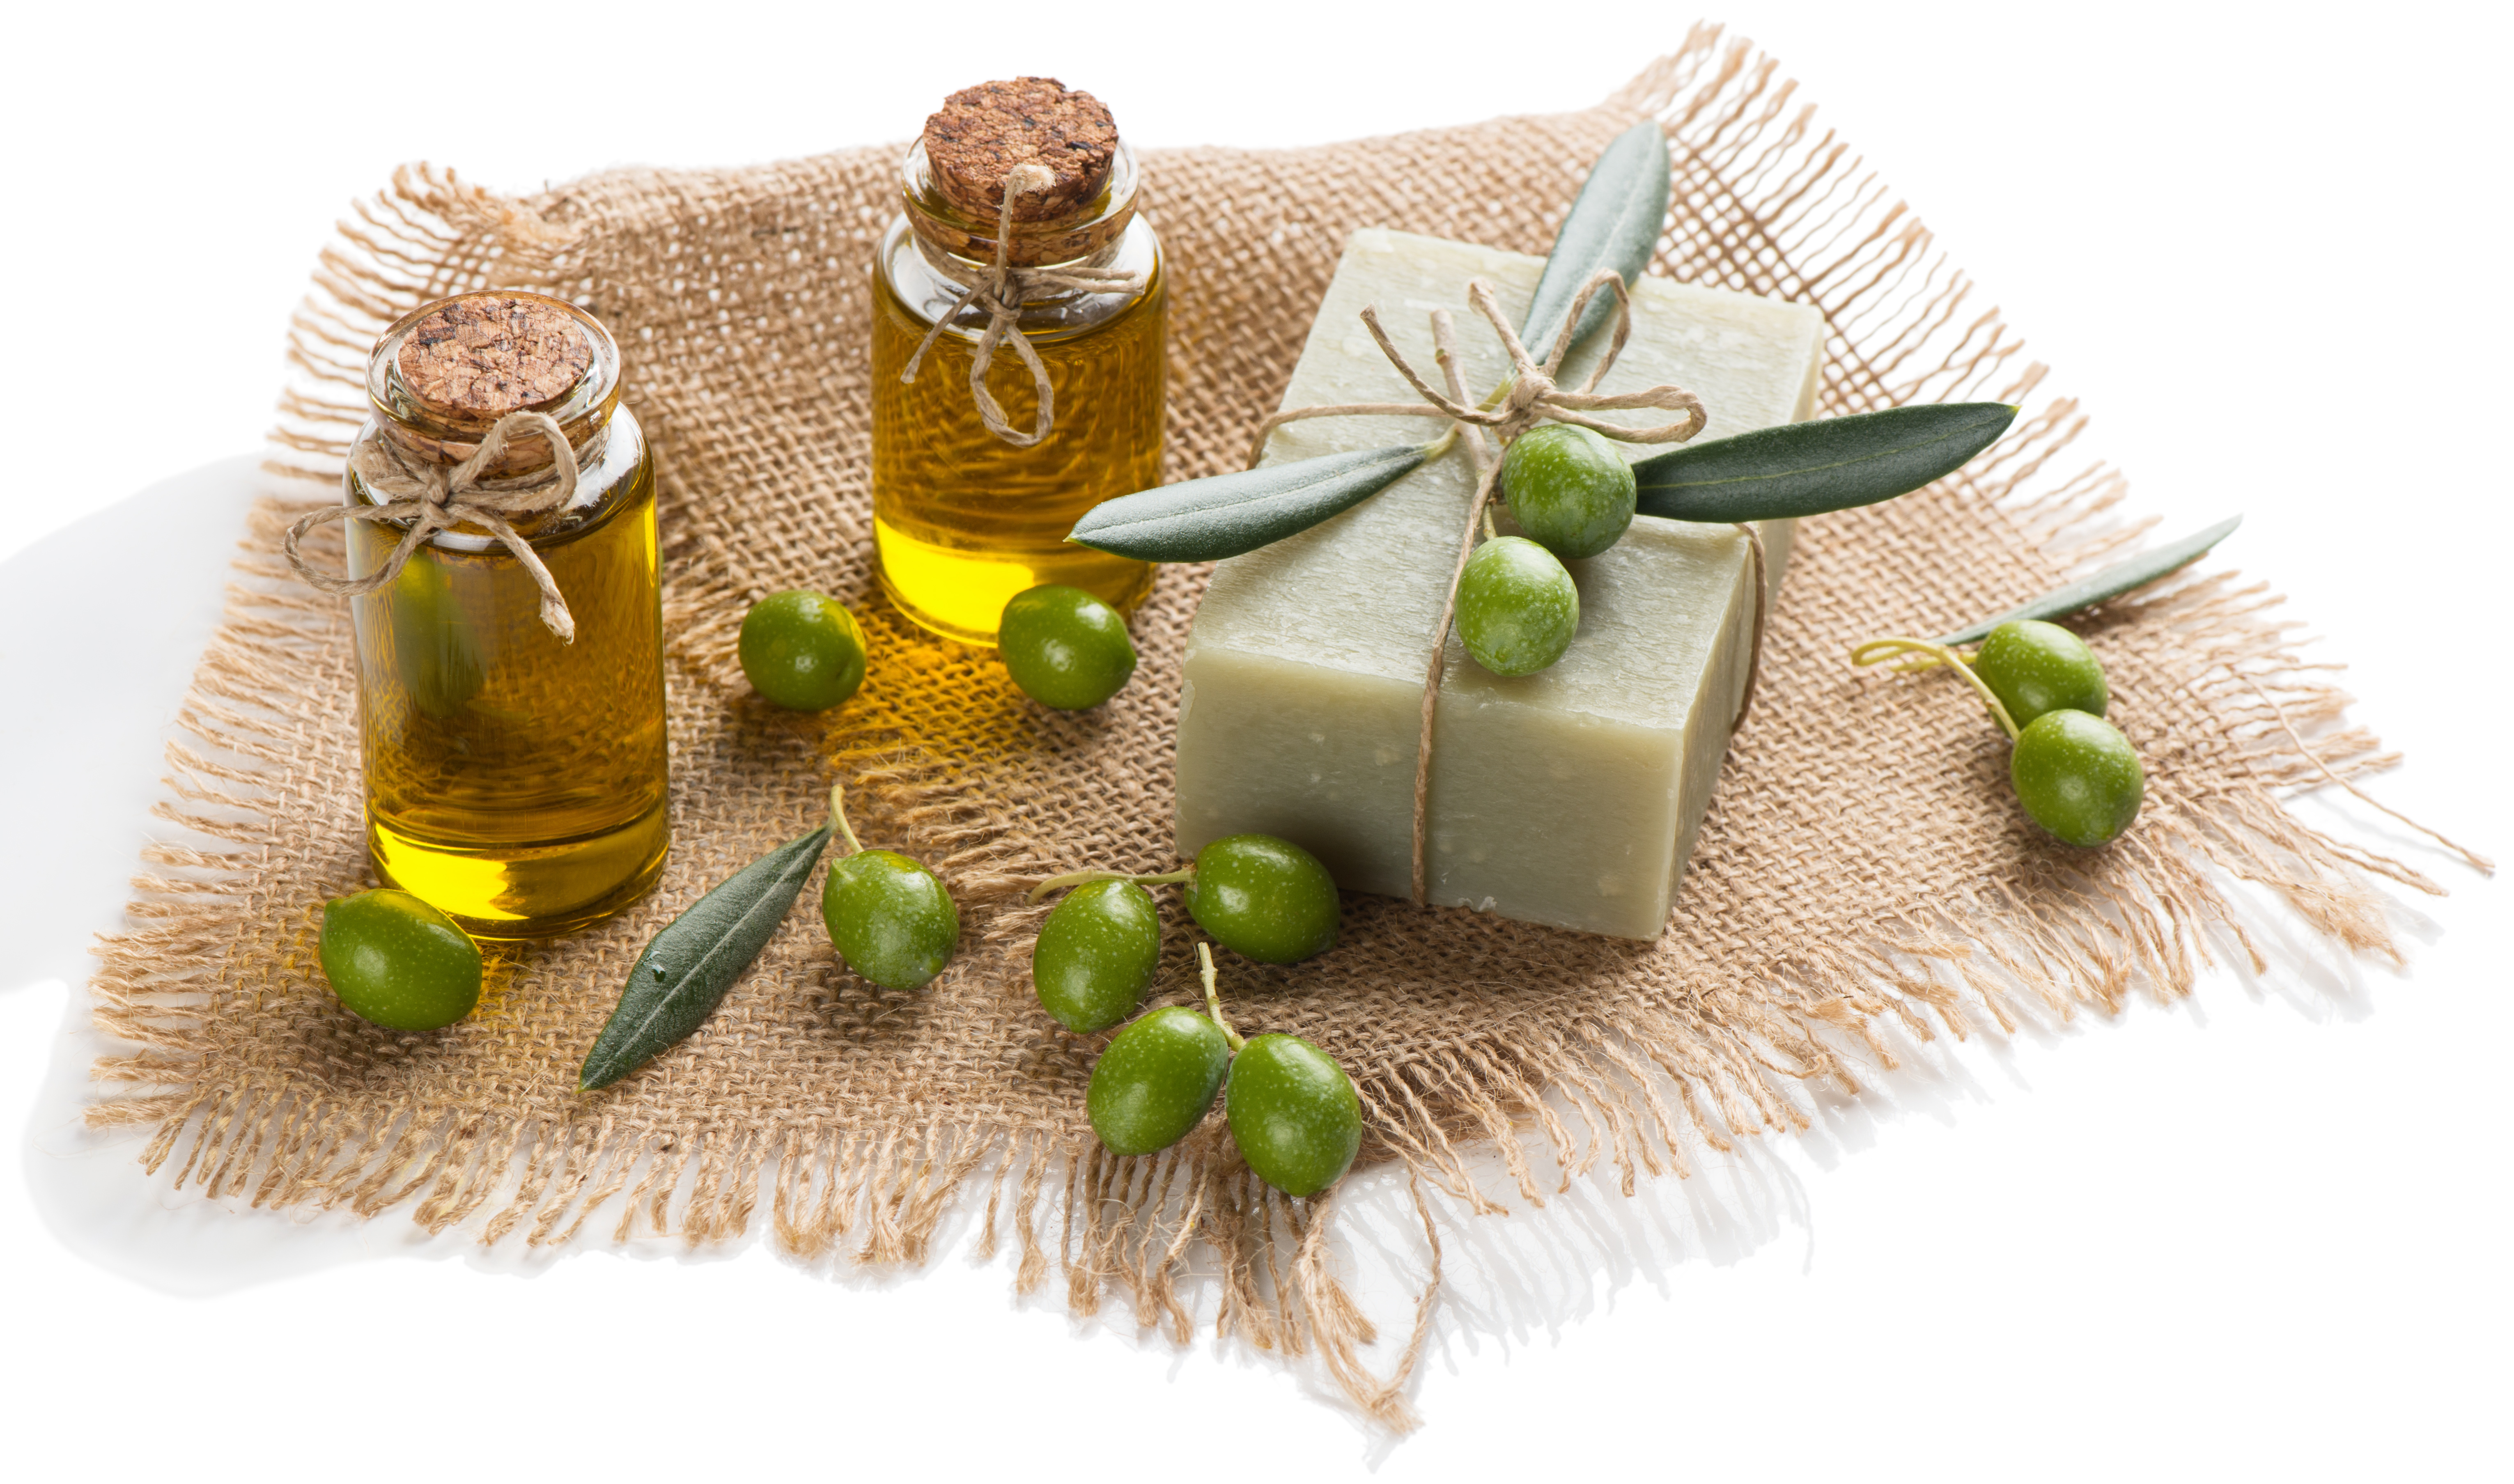 Choosing the Best Olive Oil for Making Your Own Soap